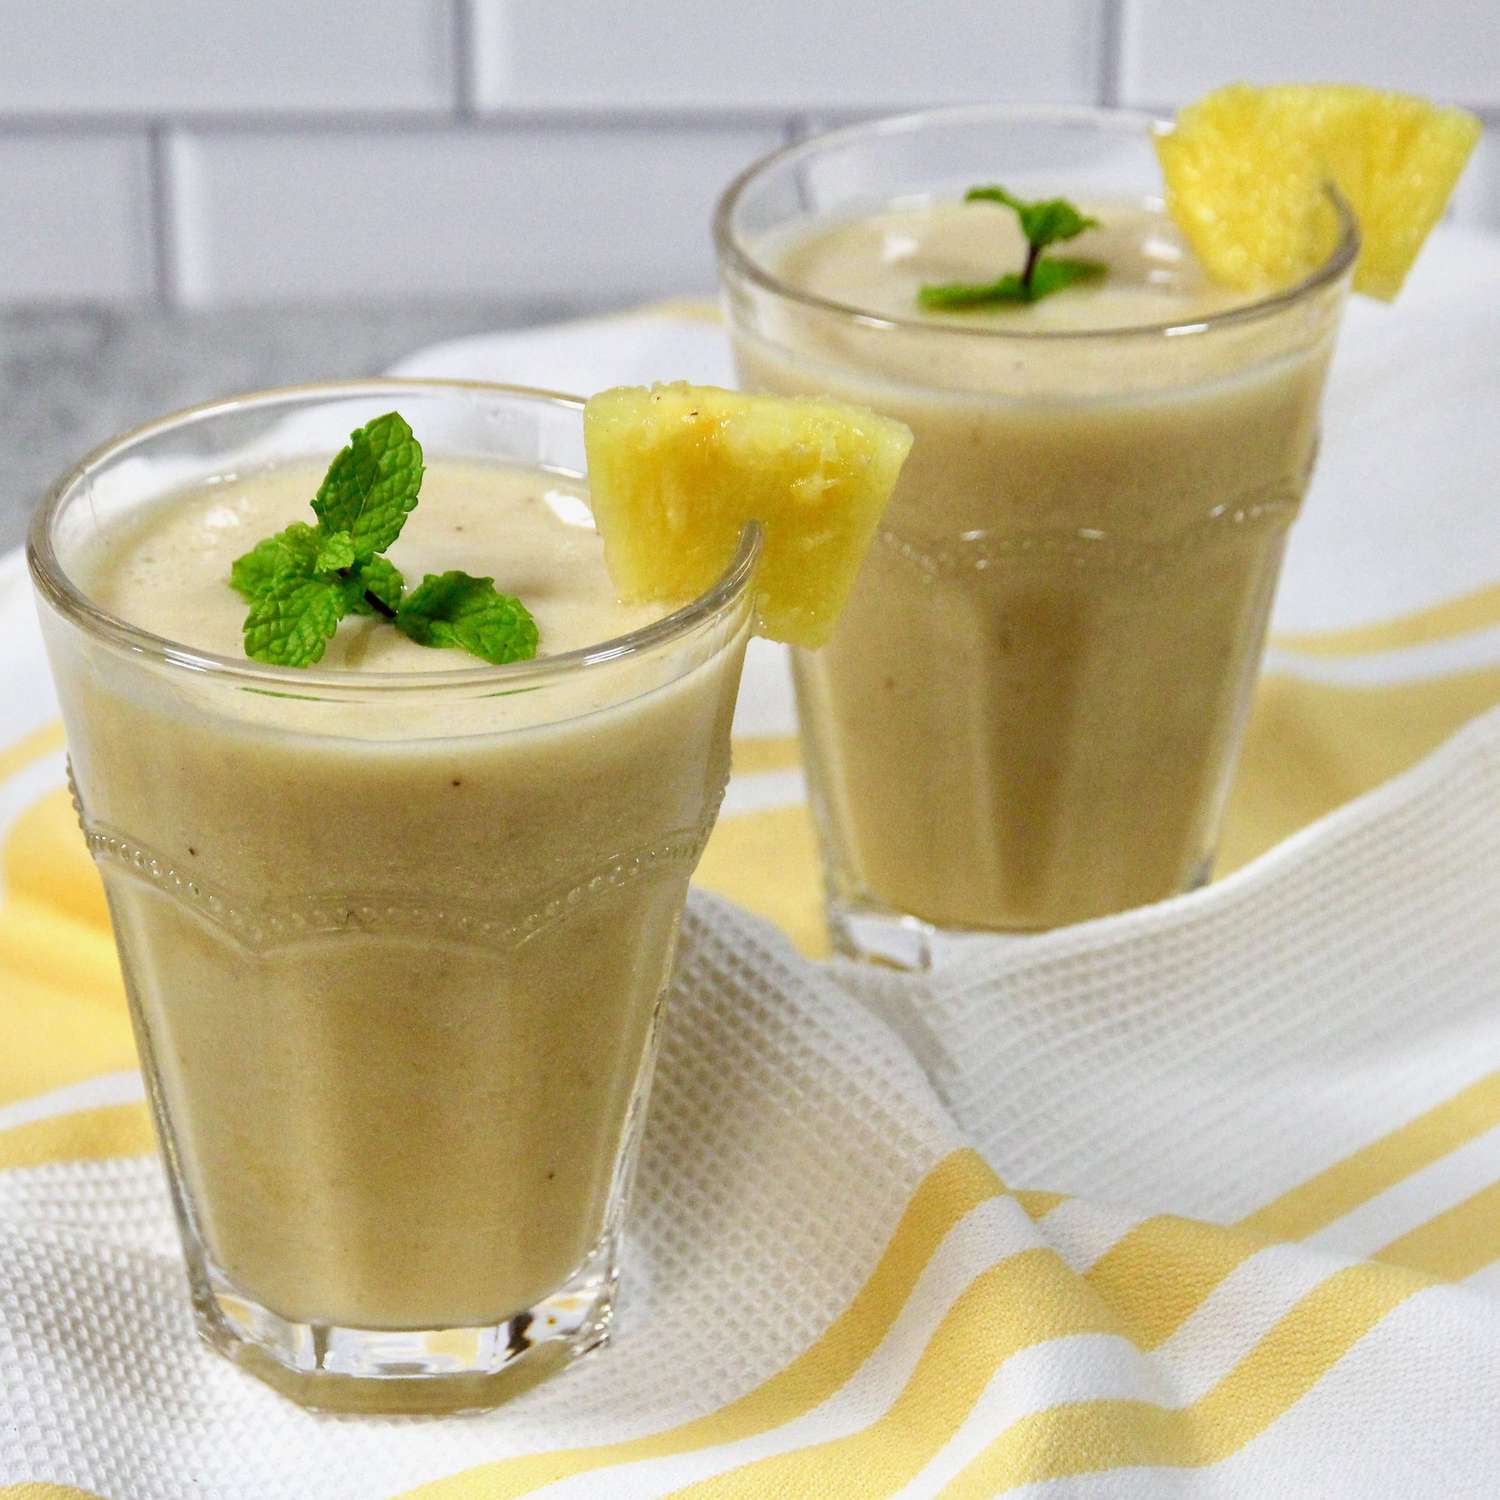 Frozen Pineapple and Banana Smoothie